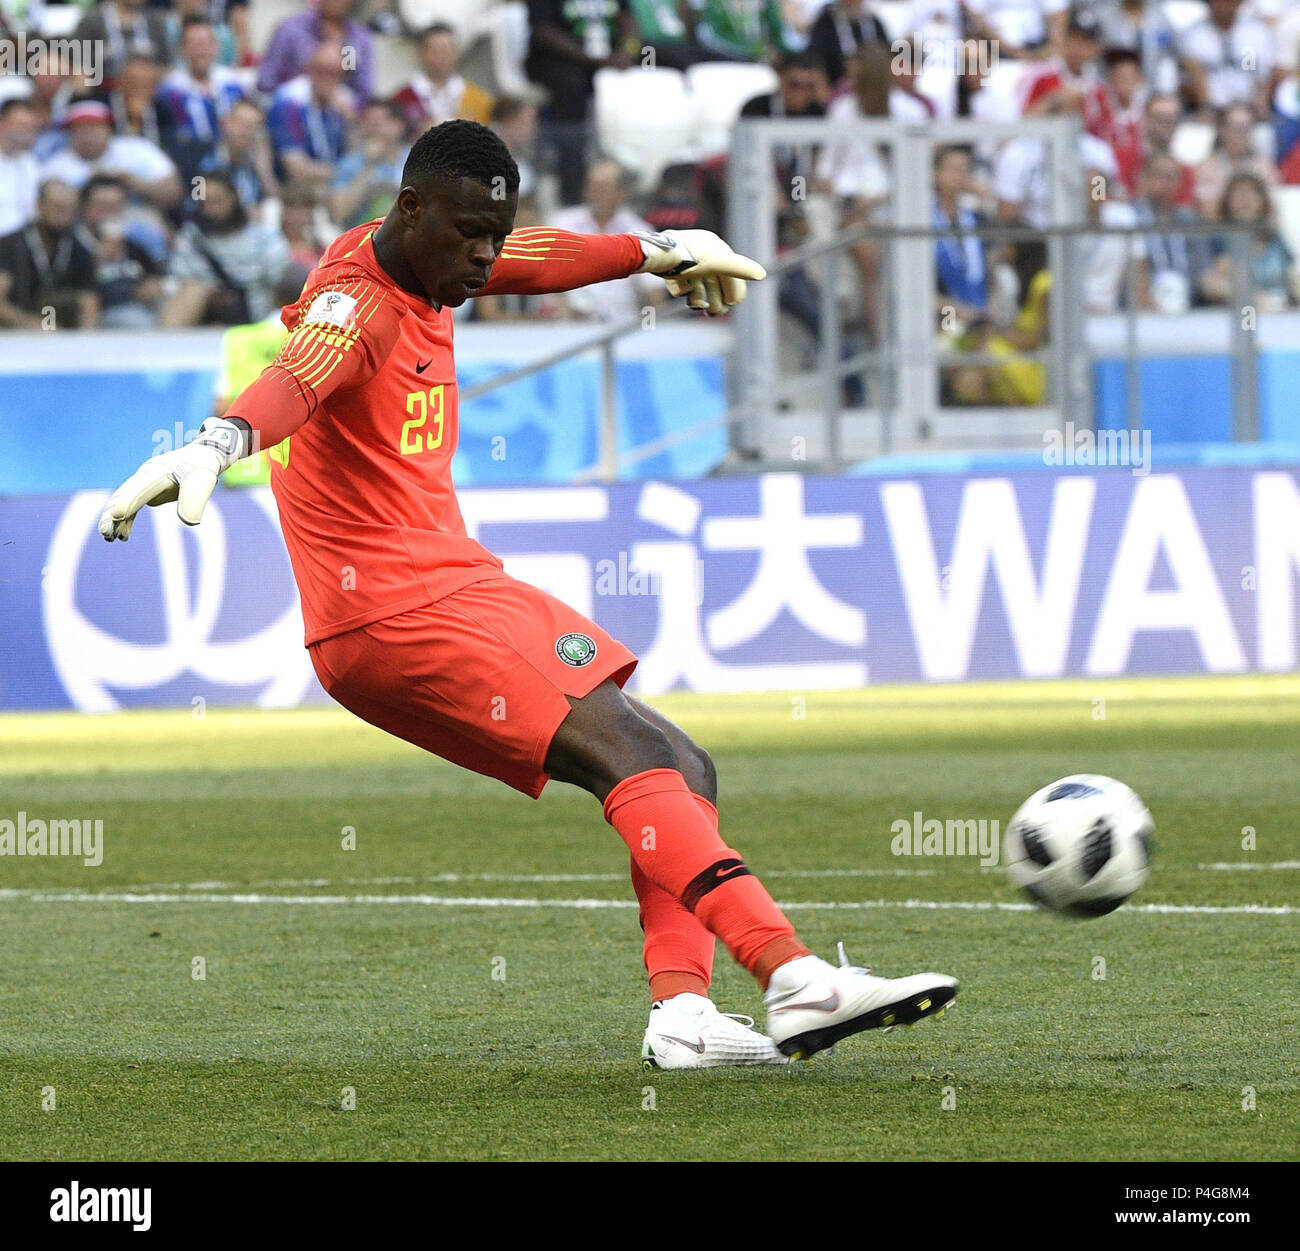 Volgograd, Russia. 22nd June, 2018. Nigeria's goalkeeper Francis Uzoho competes during the 2018 FIFA World Cup Group D match between Nigeria and Iceland in Volgograd, Russia, June 22, 2018. Credit: Lui Siu Wai/Xinhua/Alamy Live News Stock Photo